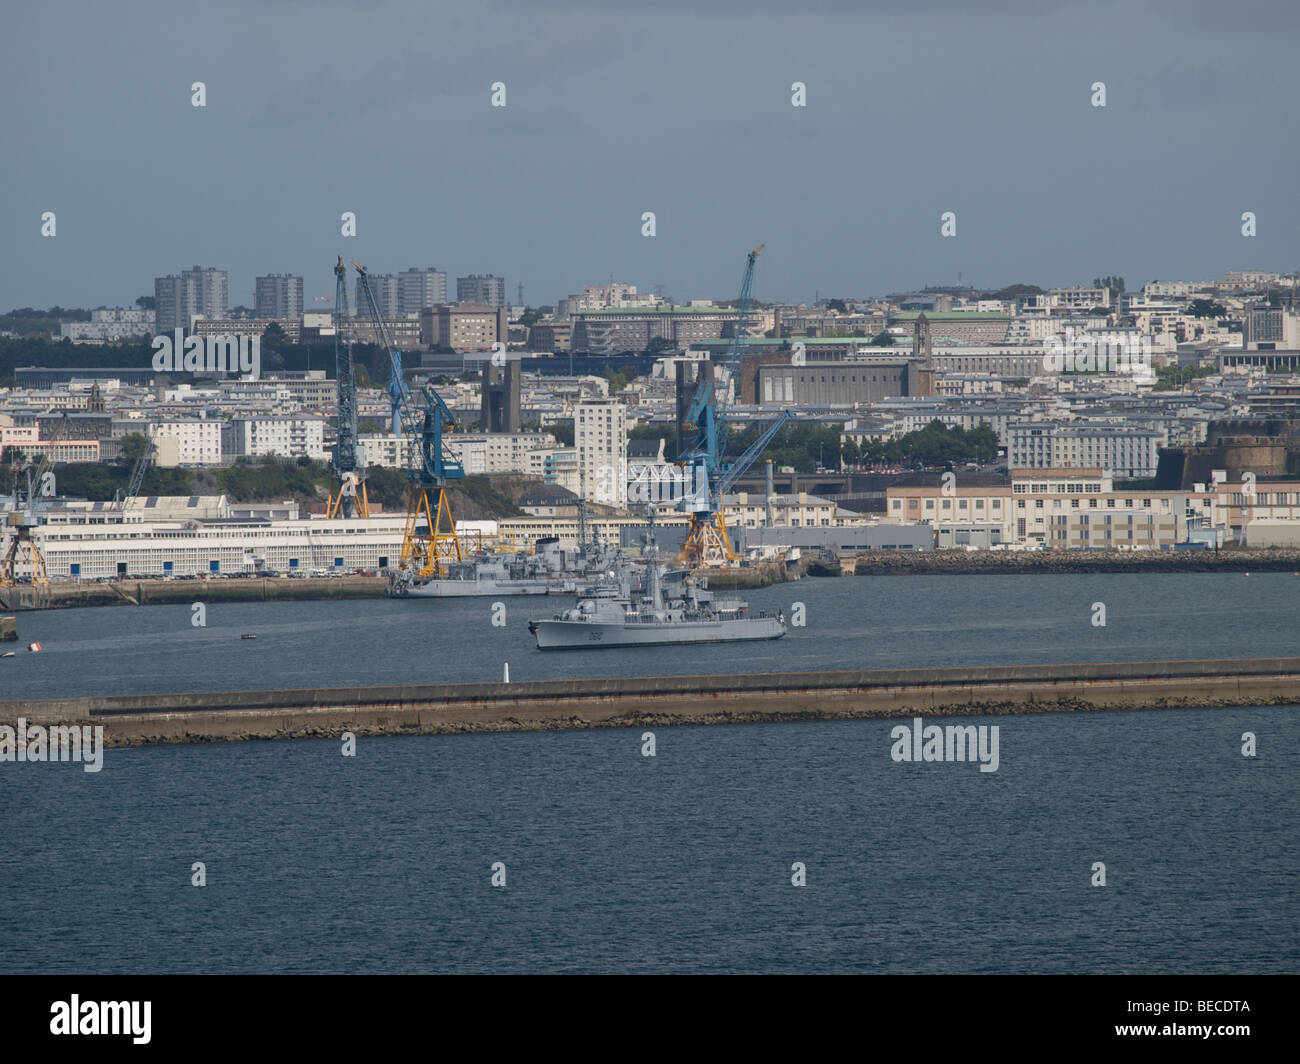 The French city of Brest has a large navy base, strategically placed on the Atlantic Ocean coast. Brest, Brittany, France Stock Photo